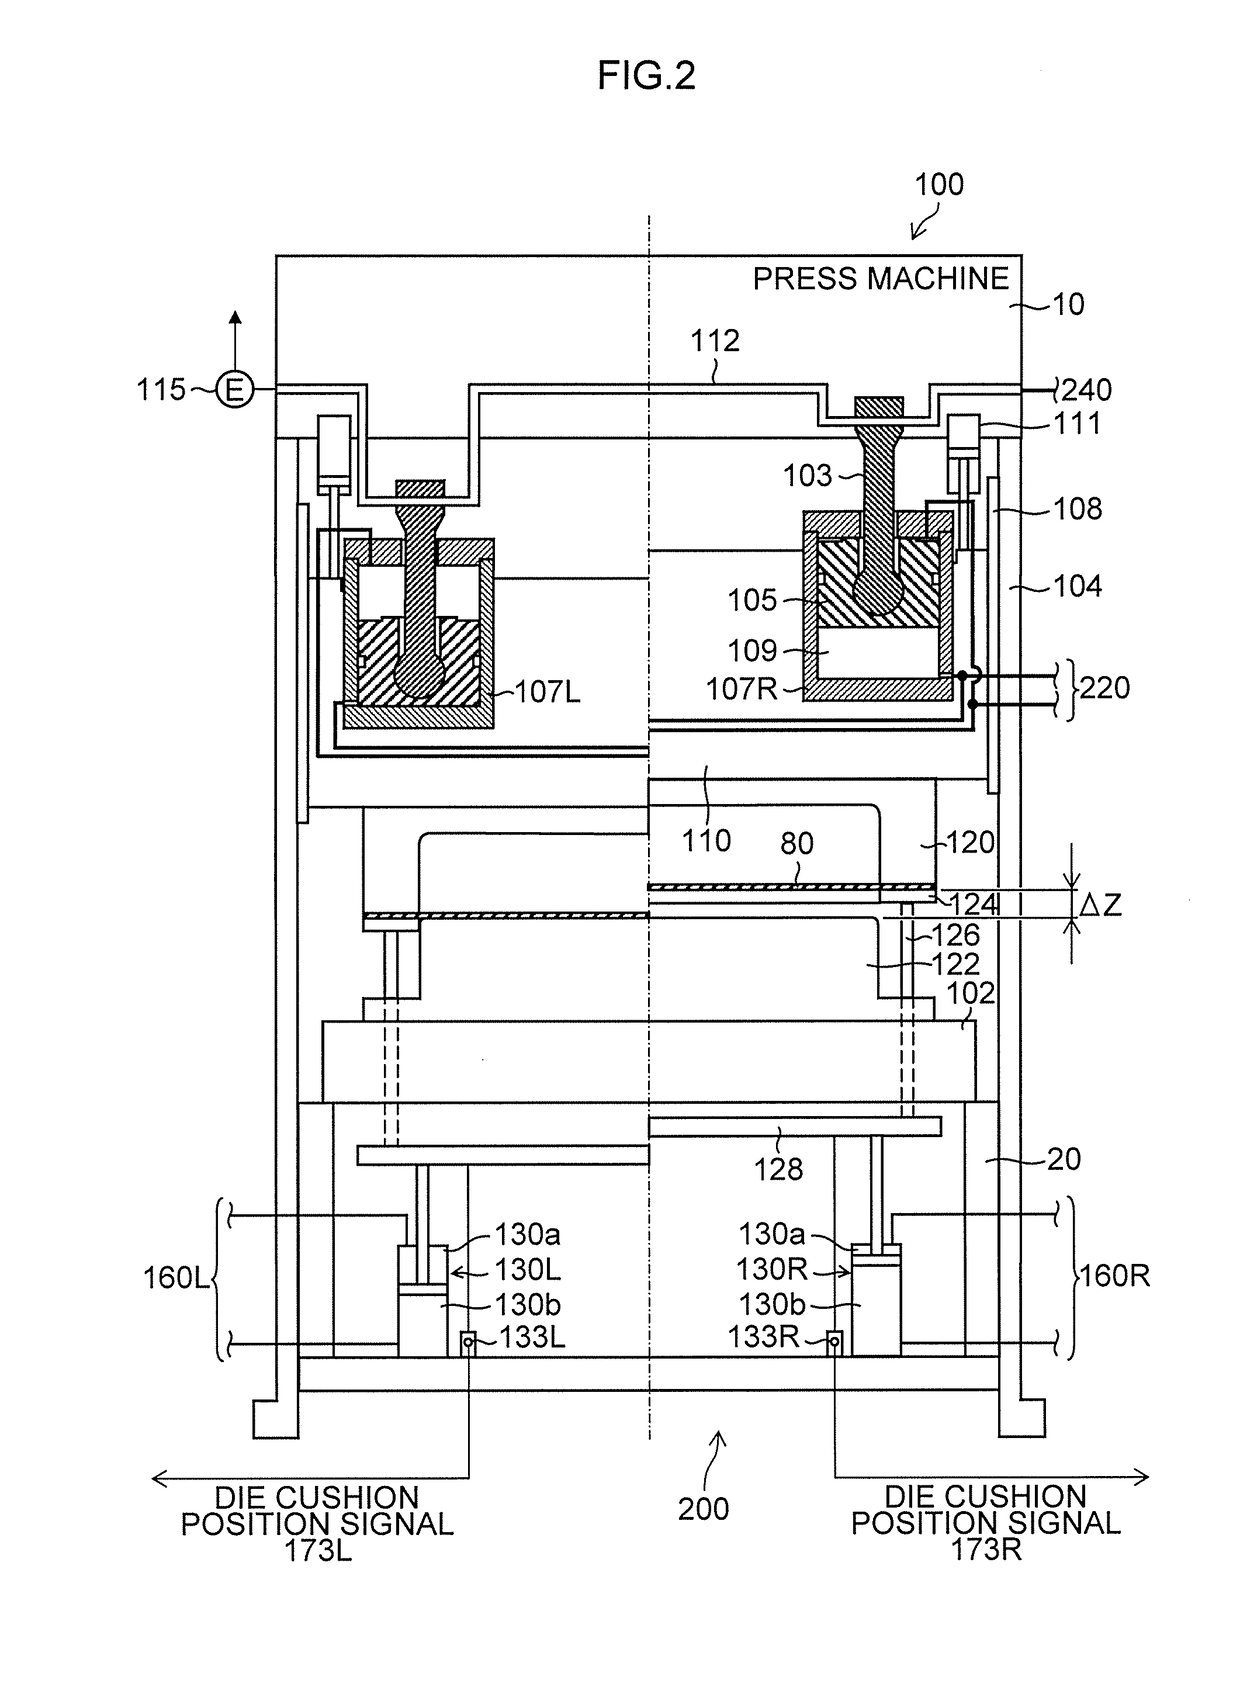 Double blank detecting device for press machine and die protecting device for press machine